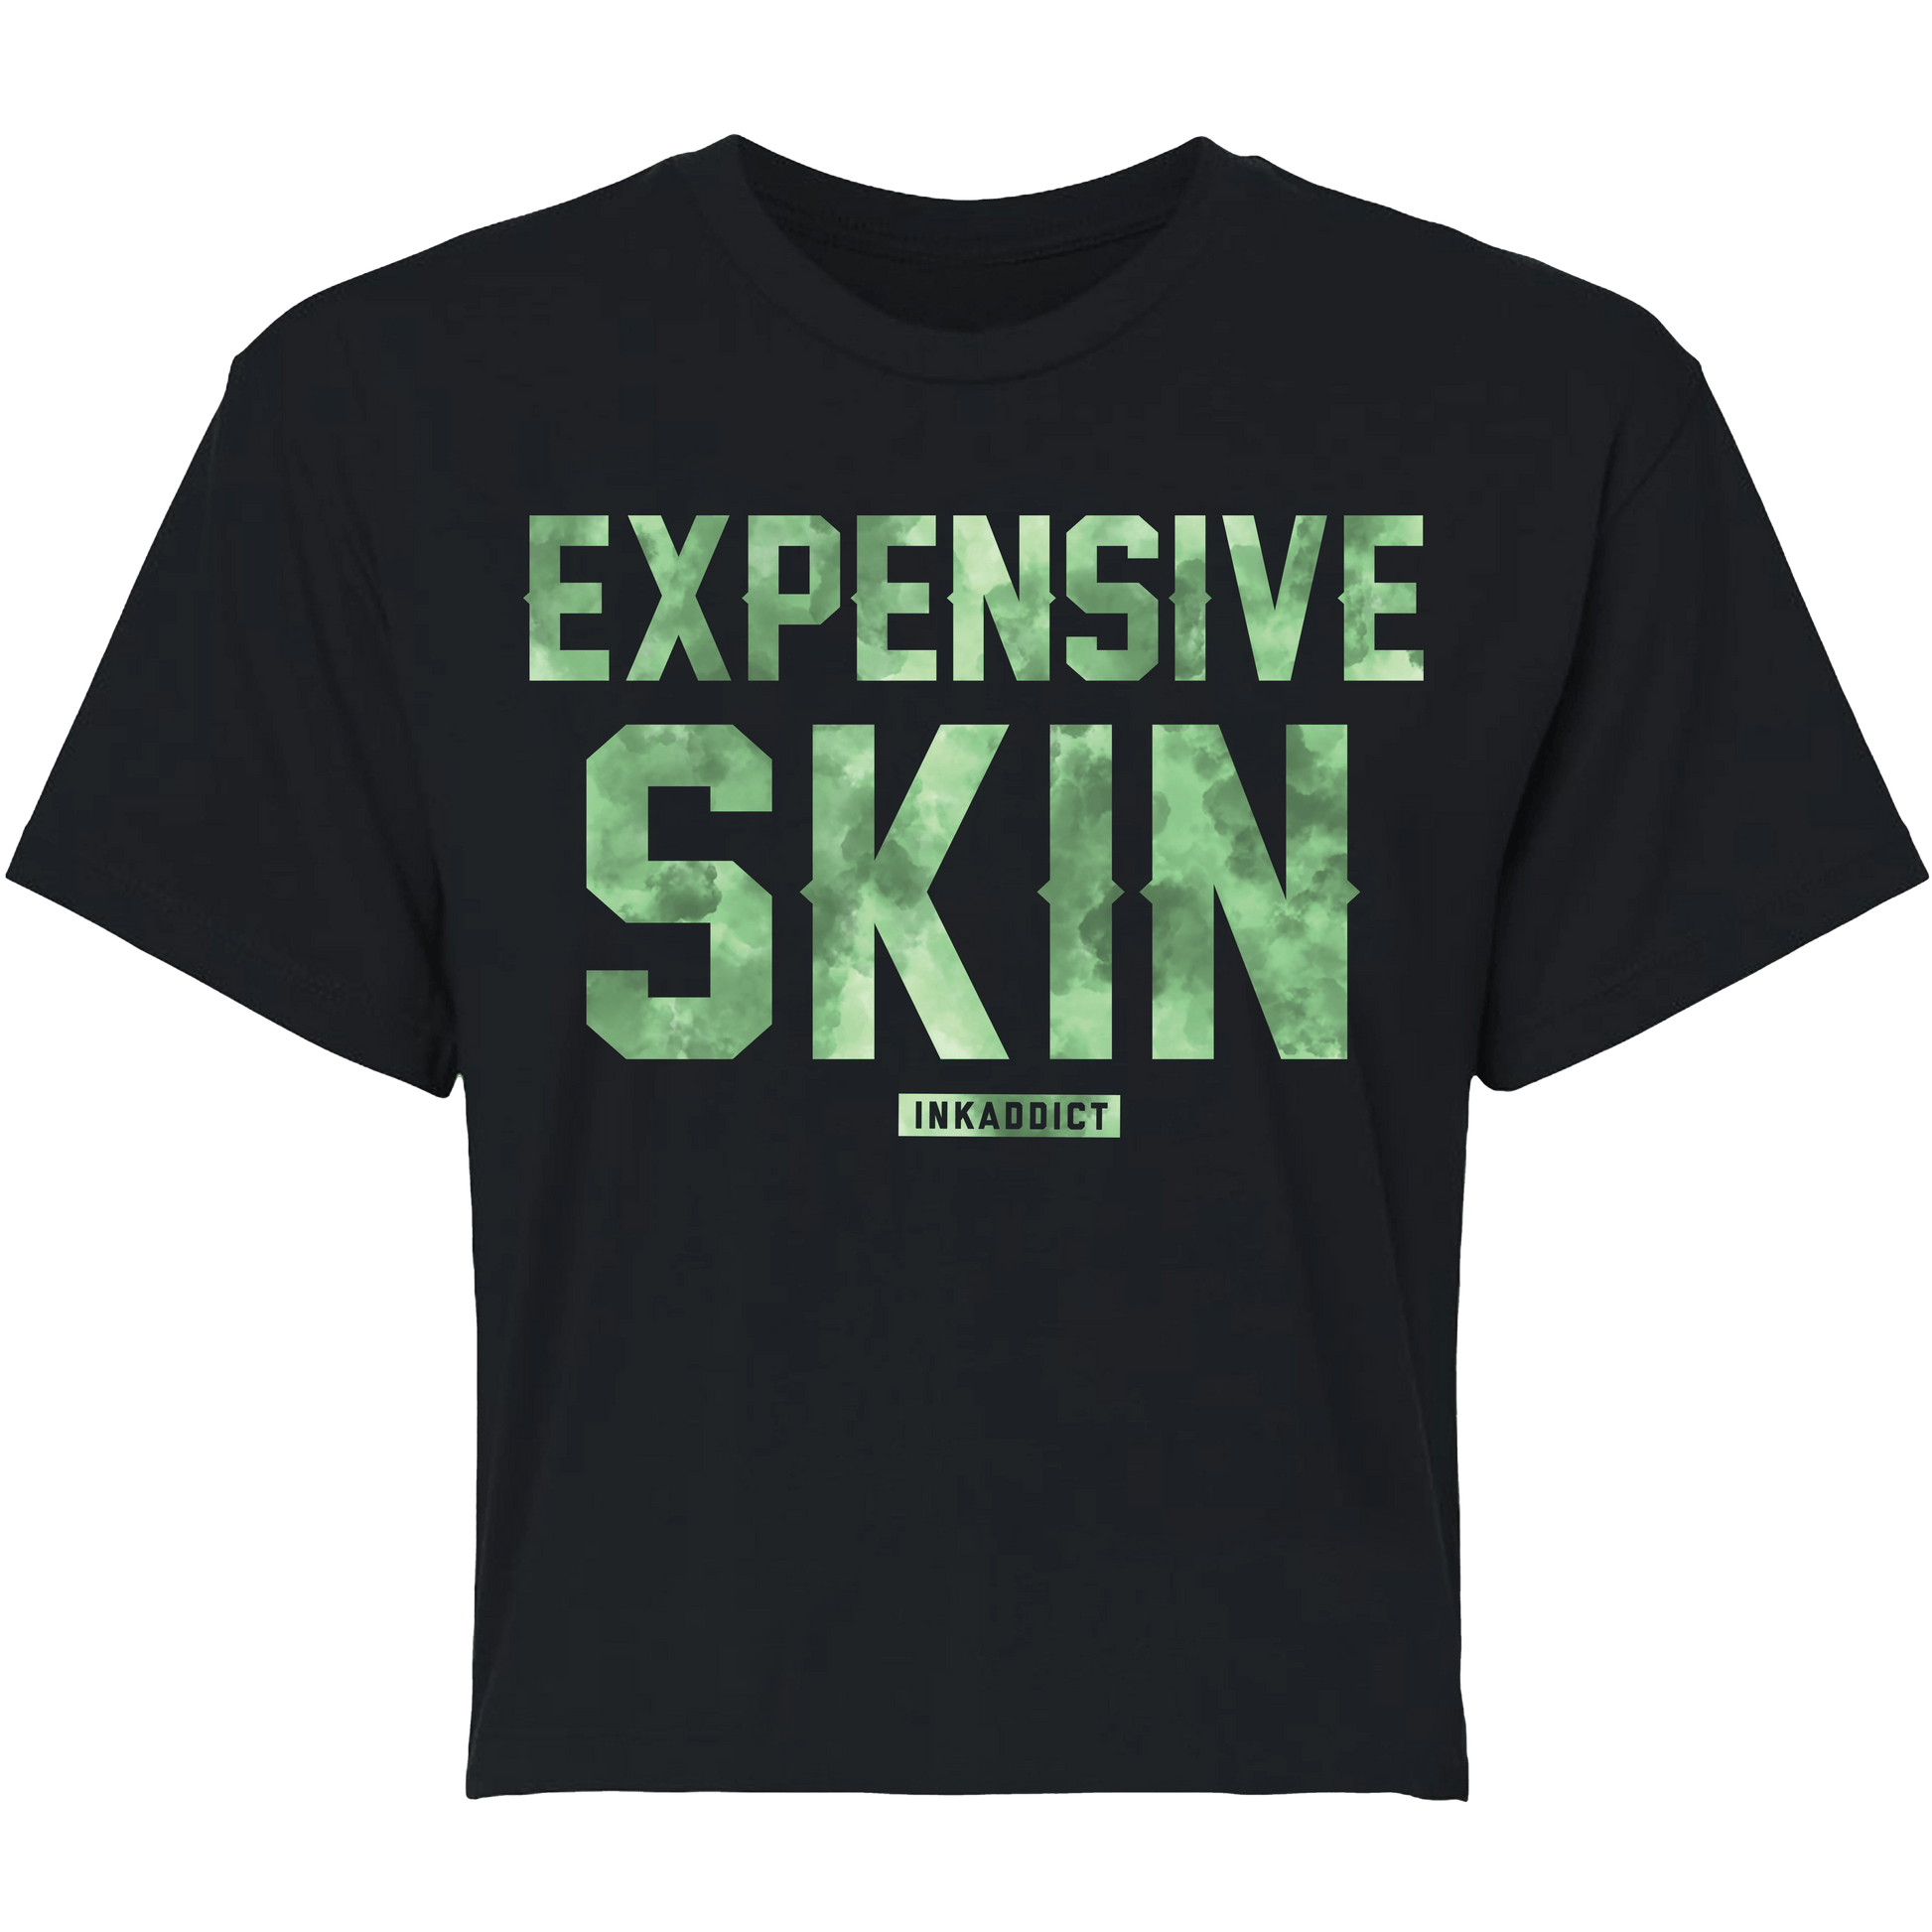 Expensive Skin Clouds Women's Cropped Tee